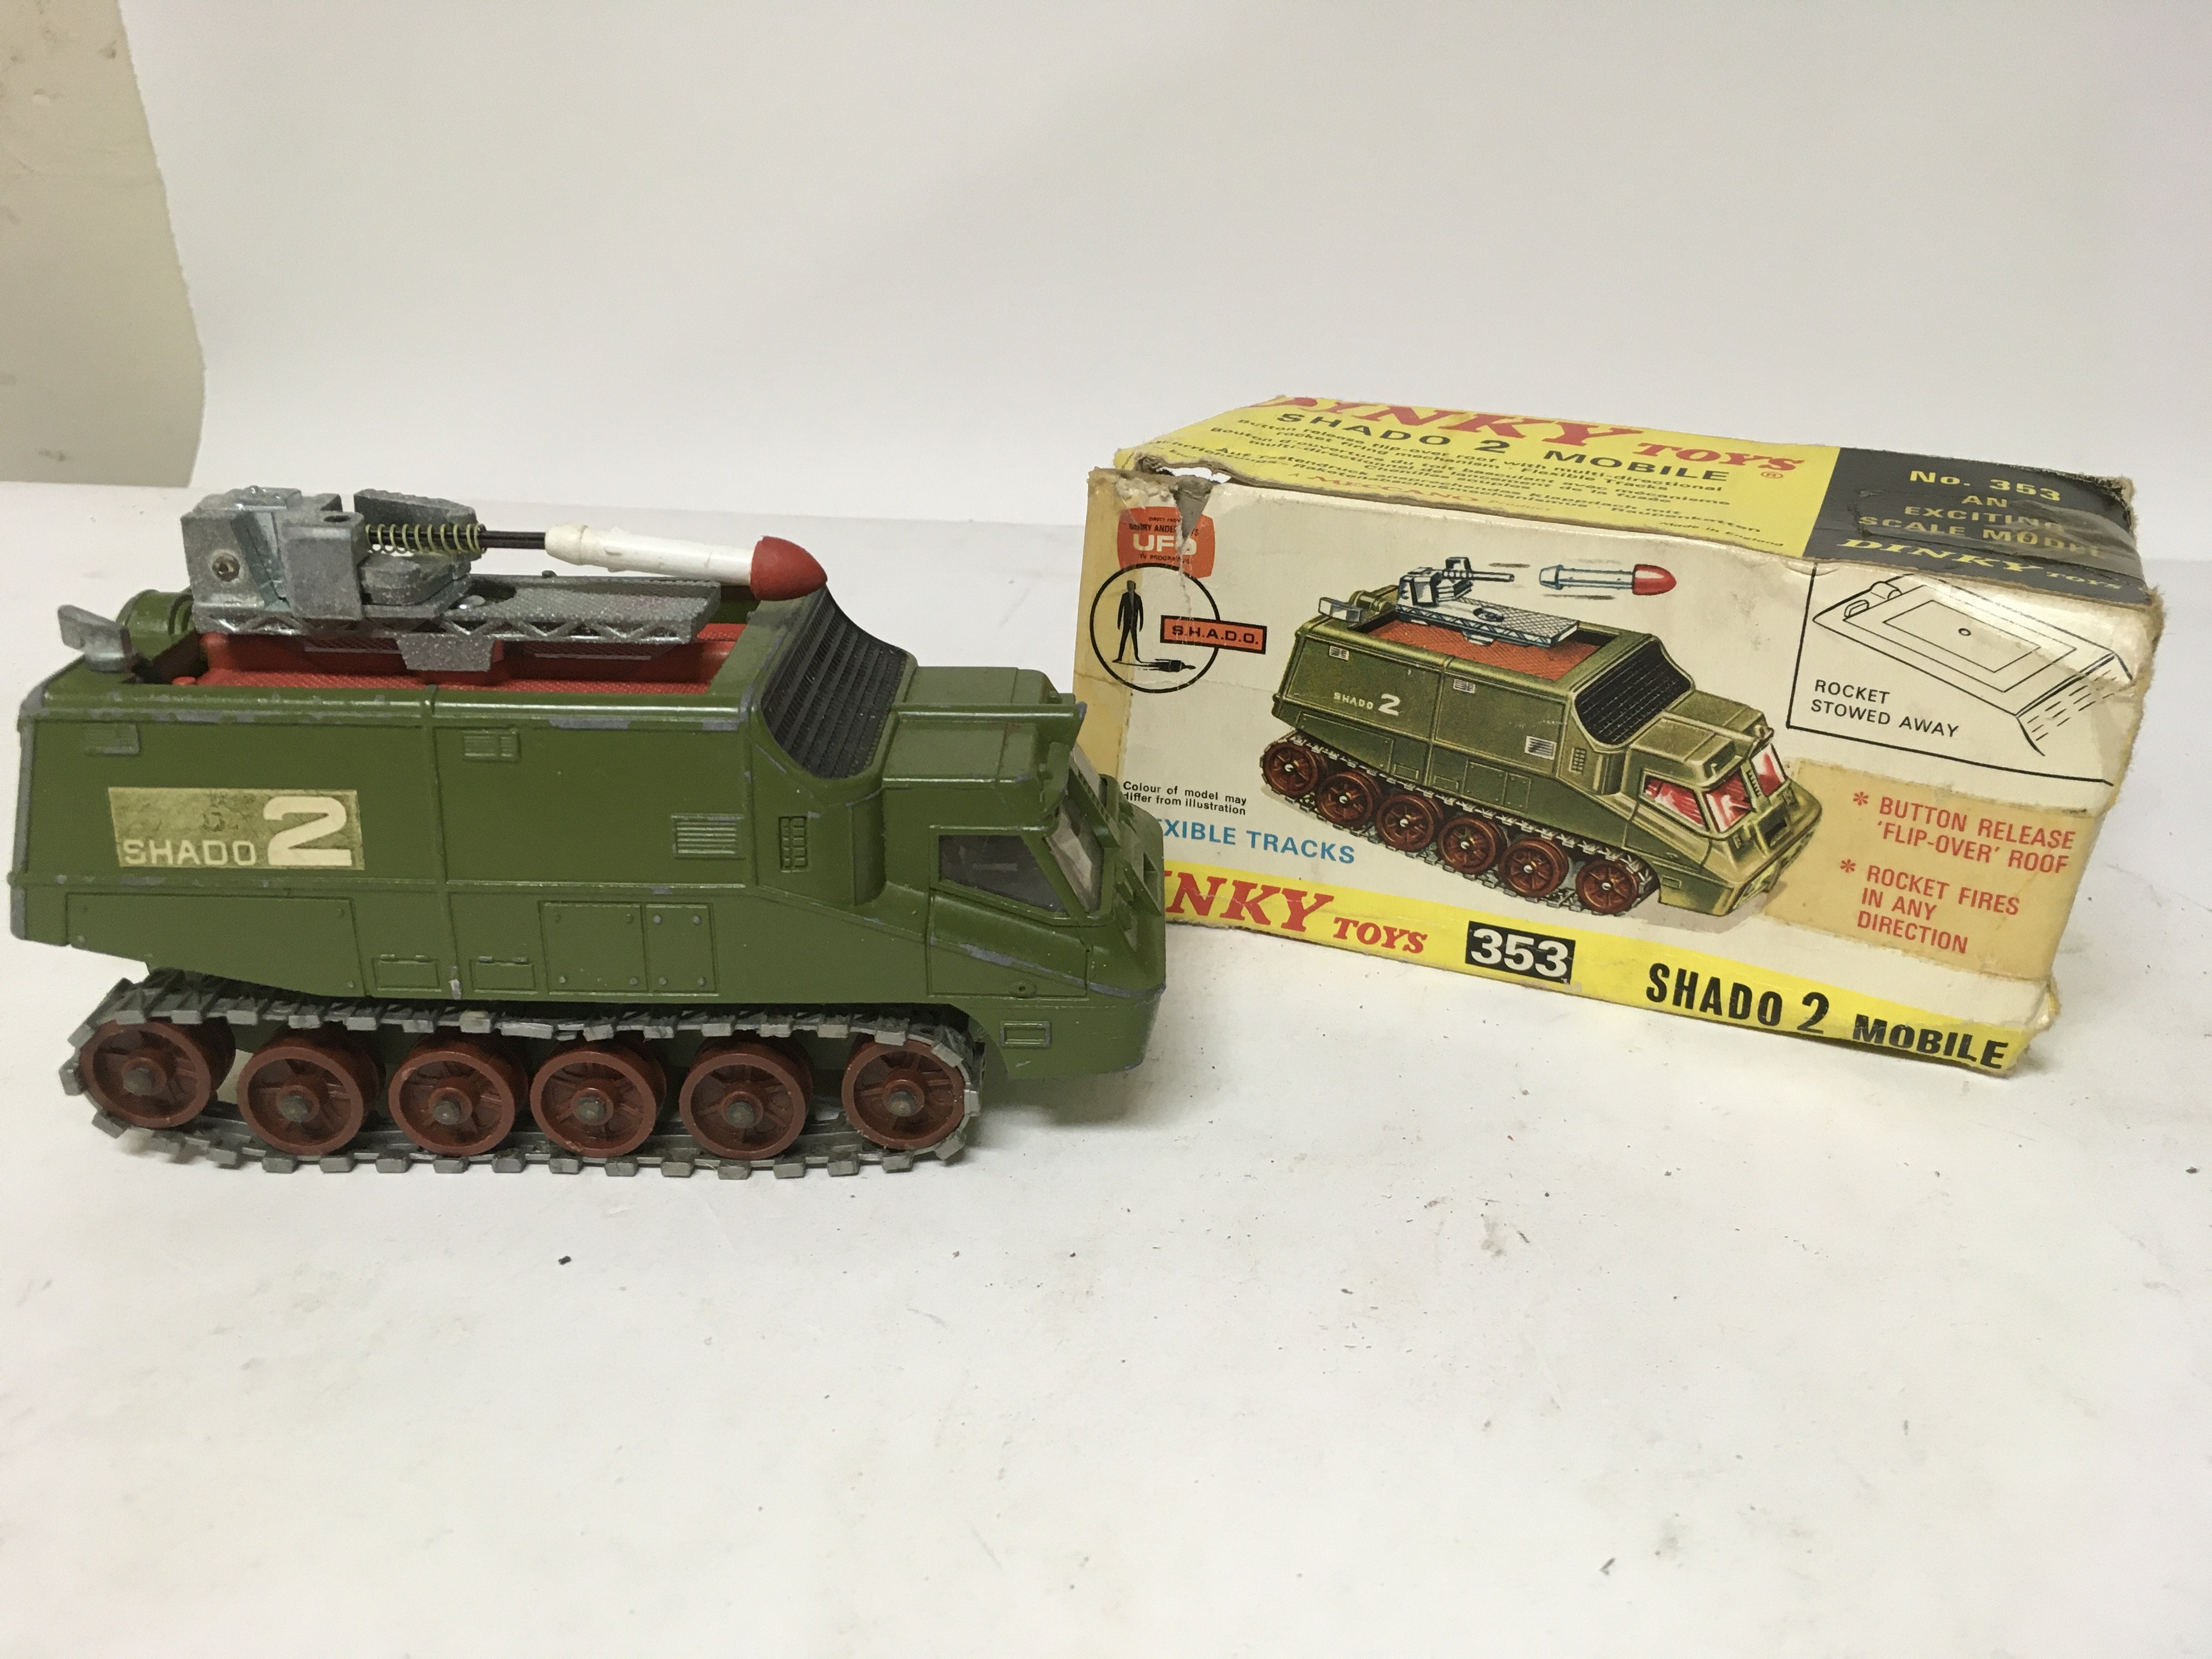 Dinky toys, boxed, #353 UFO Shado 2 mobile, Gerry